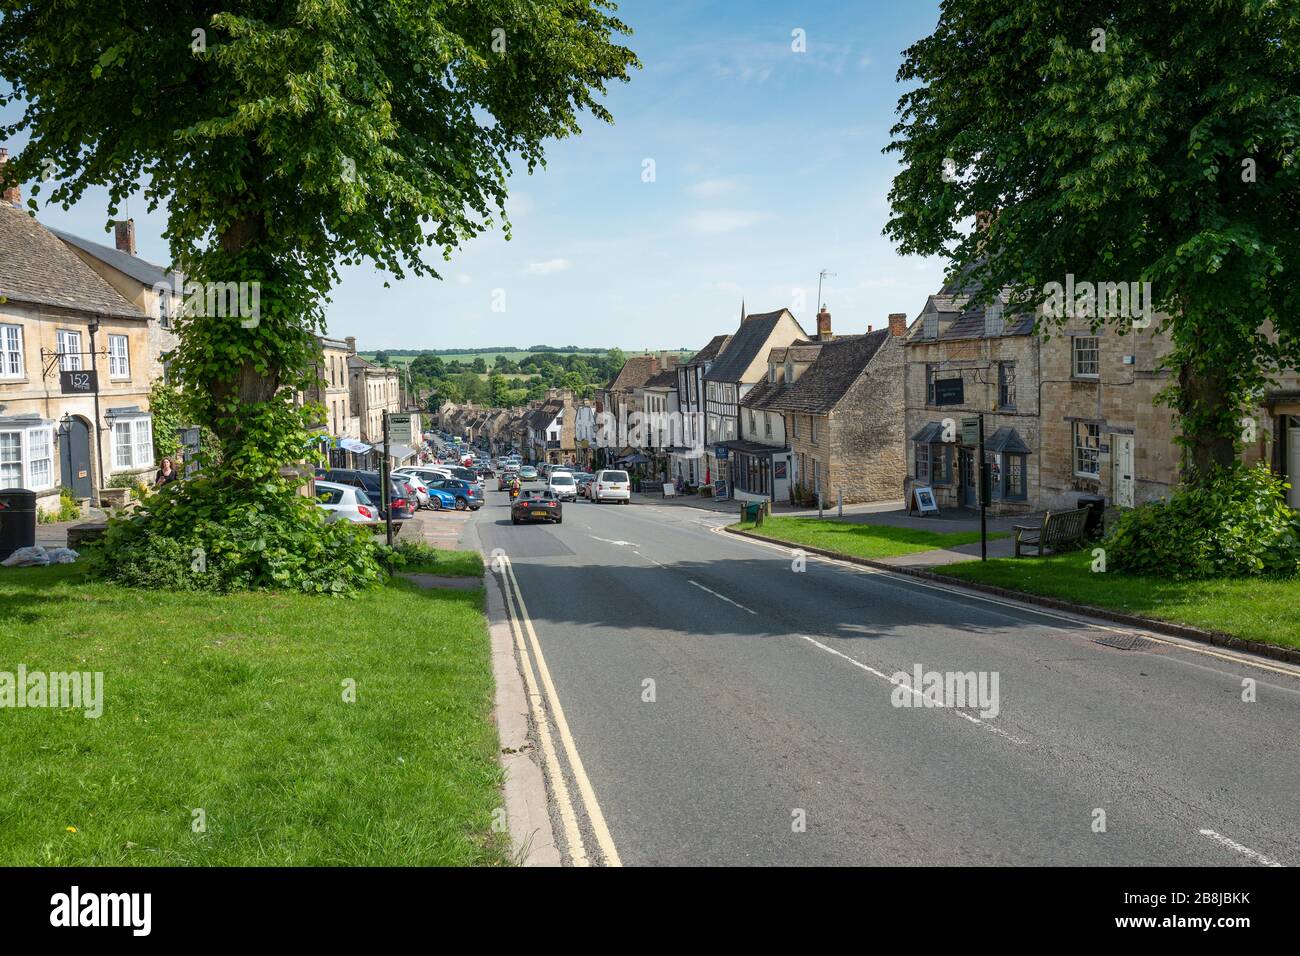 Le Bay Tree Hotel Burford Oxfordshire Banque D'Images